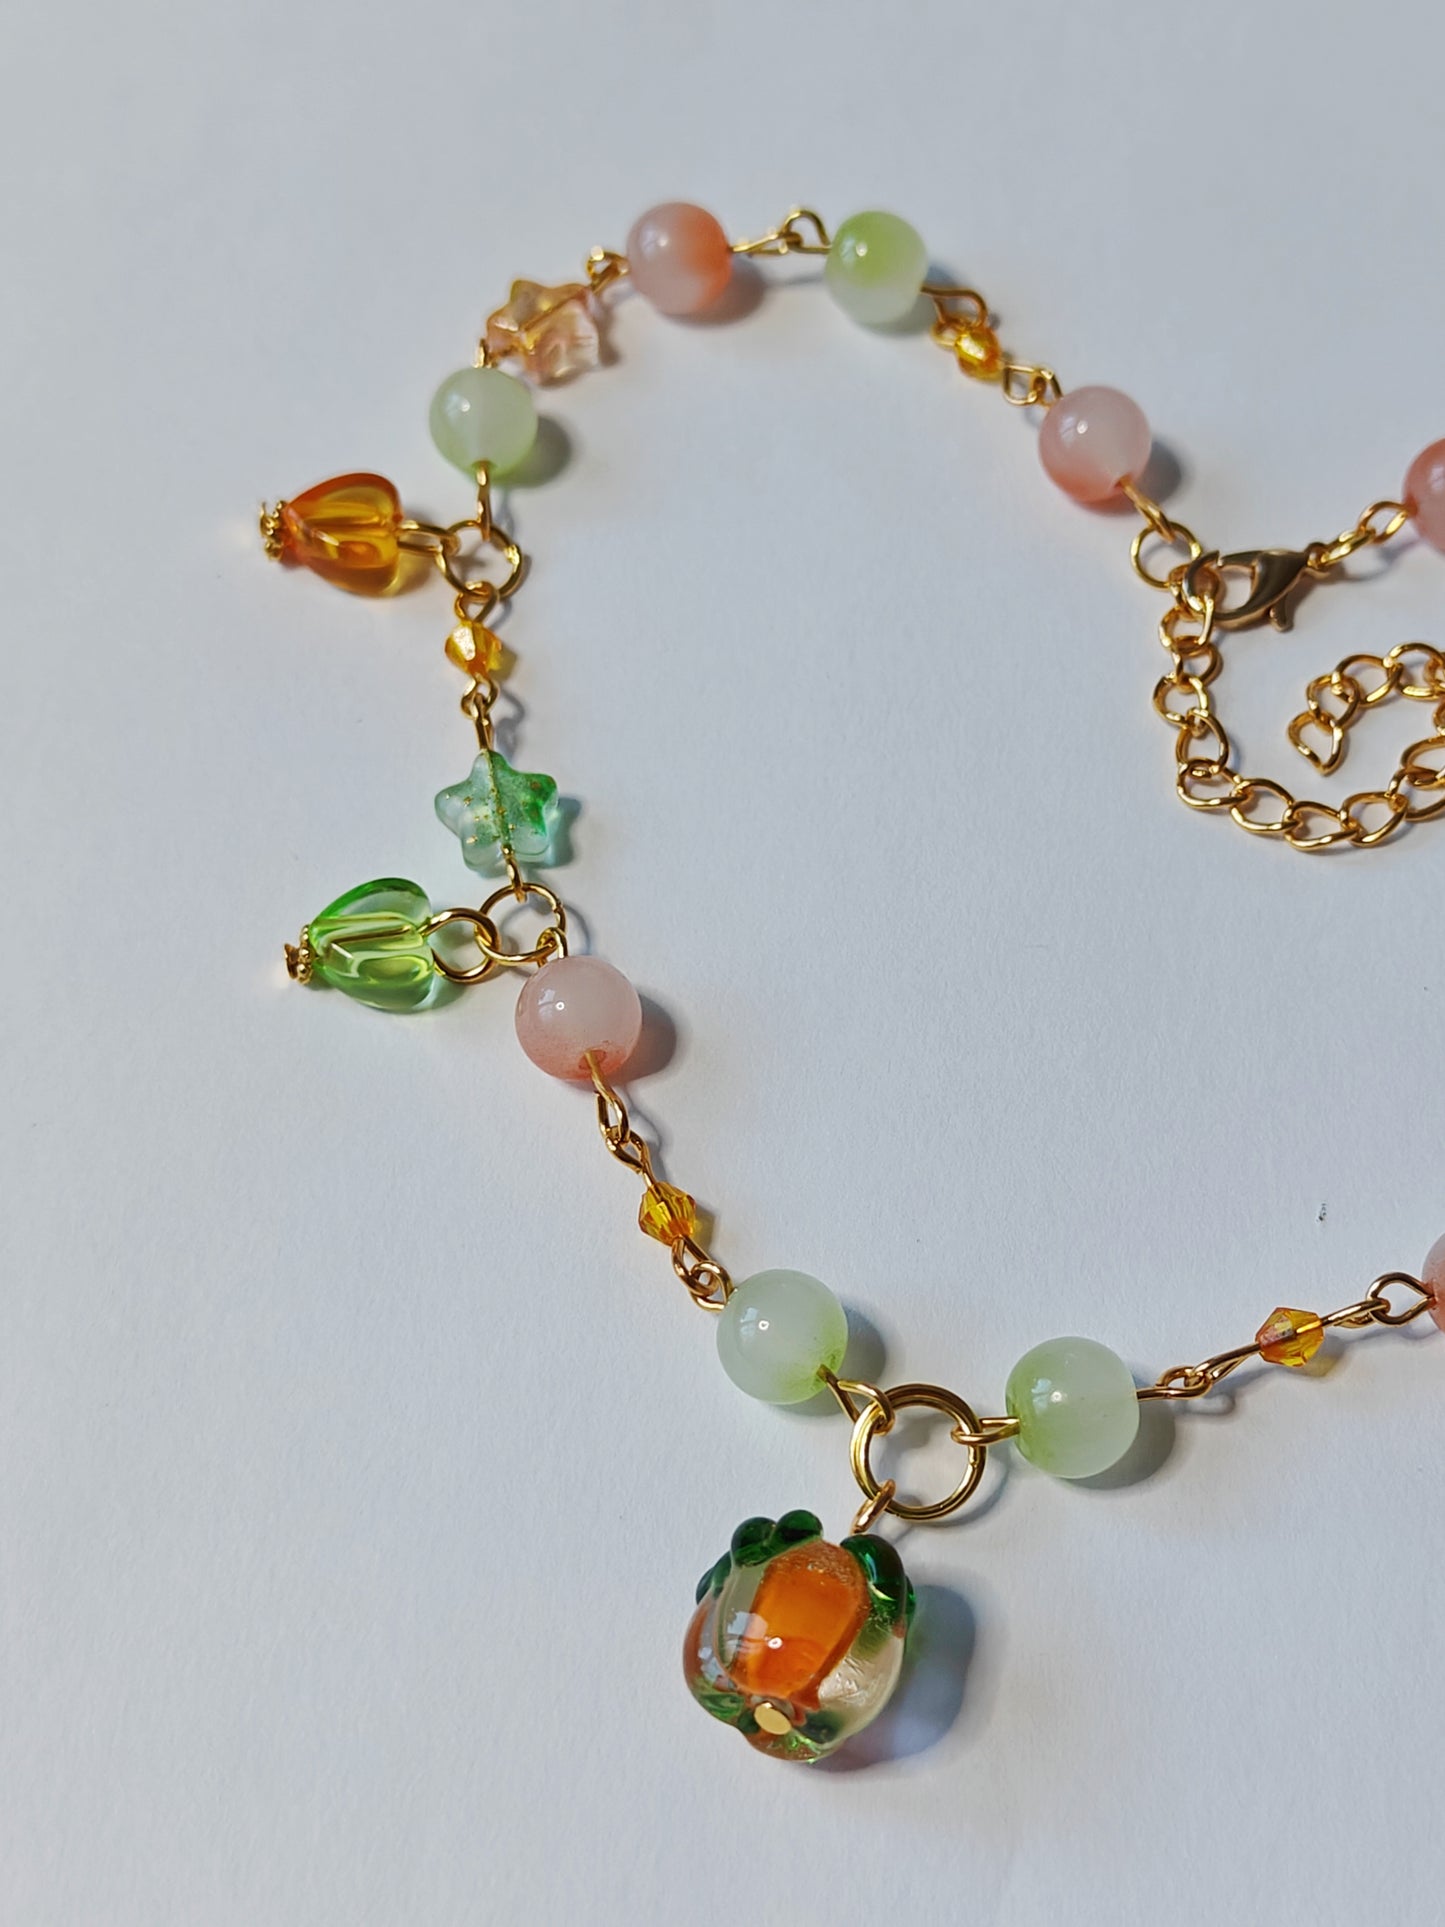 Persimmon Necklace